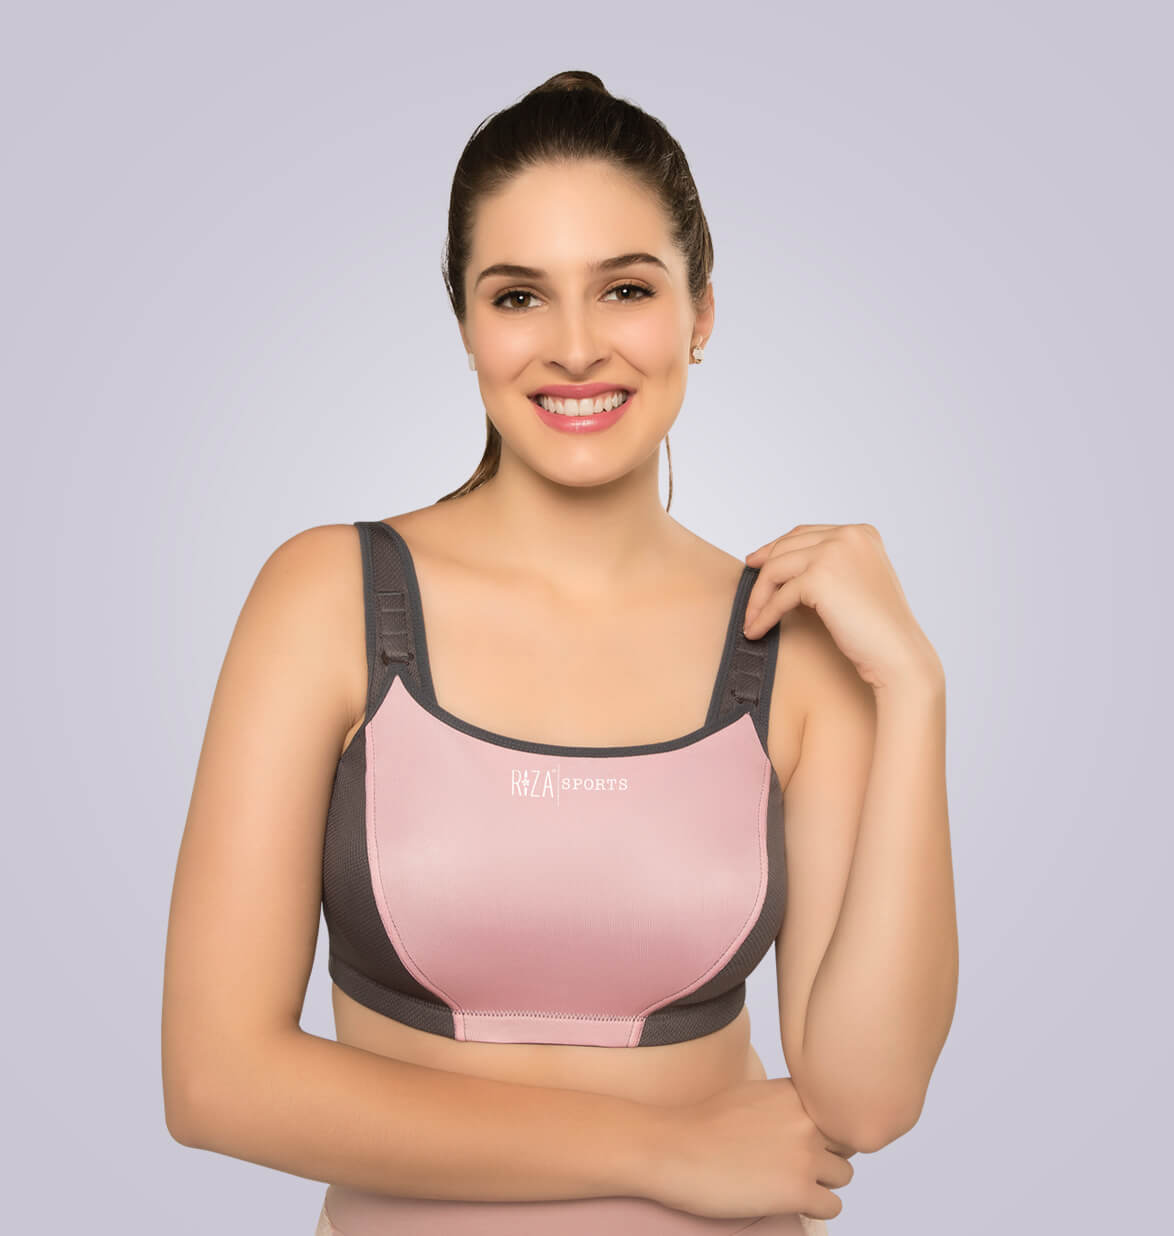 RIZA by TRYLO - Trylo has Bras that can go anytime anywhere! Carry the body  comfort from Trylo Intimates. #Trylo #Trylointimates #Tryloindia  #Trlyobraonline #Trylobra #Rizabytrylo #Riza #Rizaintimates #NonPadded  #NonWired #FullCoverage #CottonBra